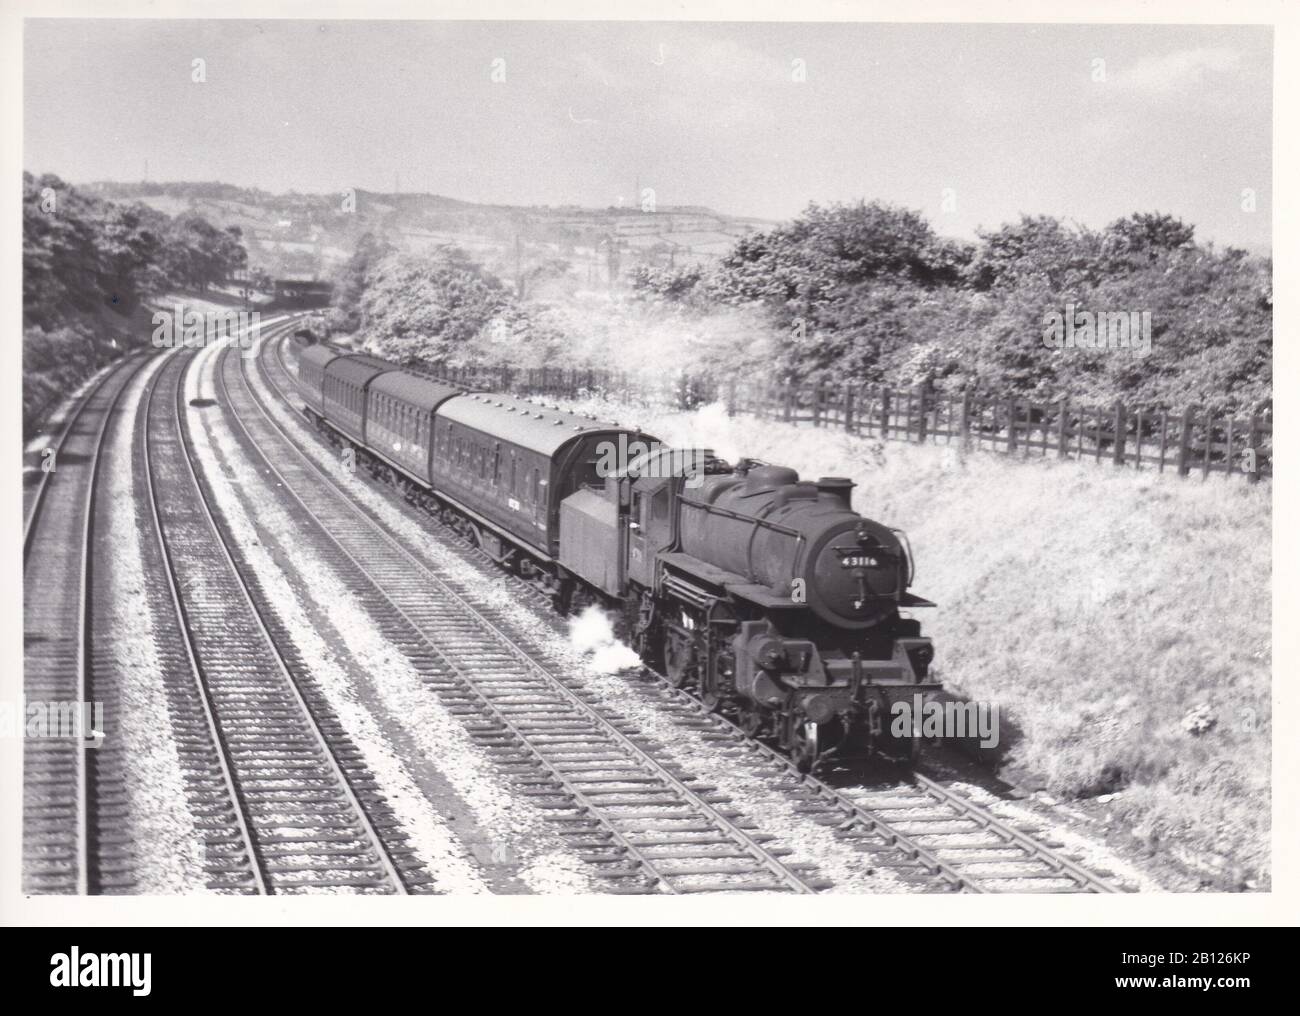 Vintage black and white photo of steam locomotive train - Ivatt Class 4MT 2-6-0 on a Manchester Vic to Normanton train near Thornhill May 1957. Stock Photo